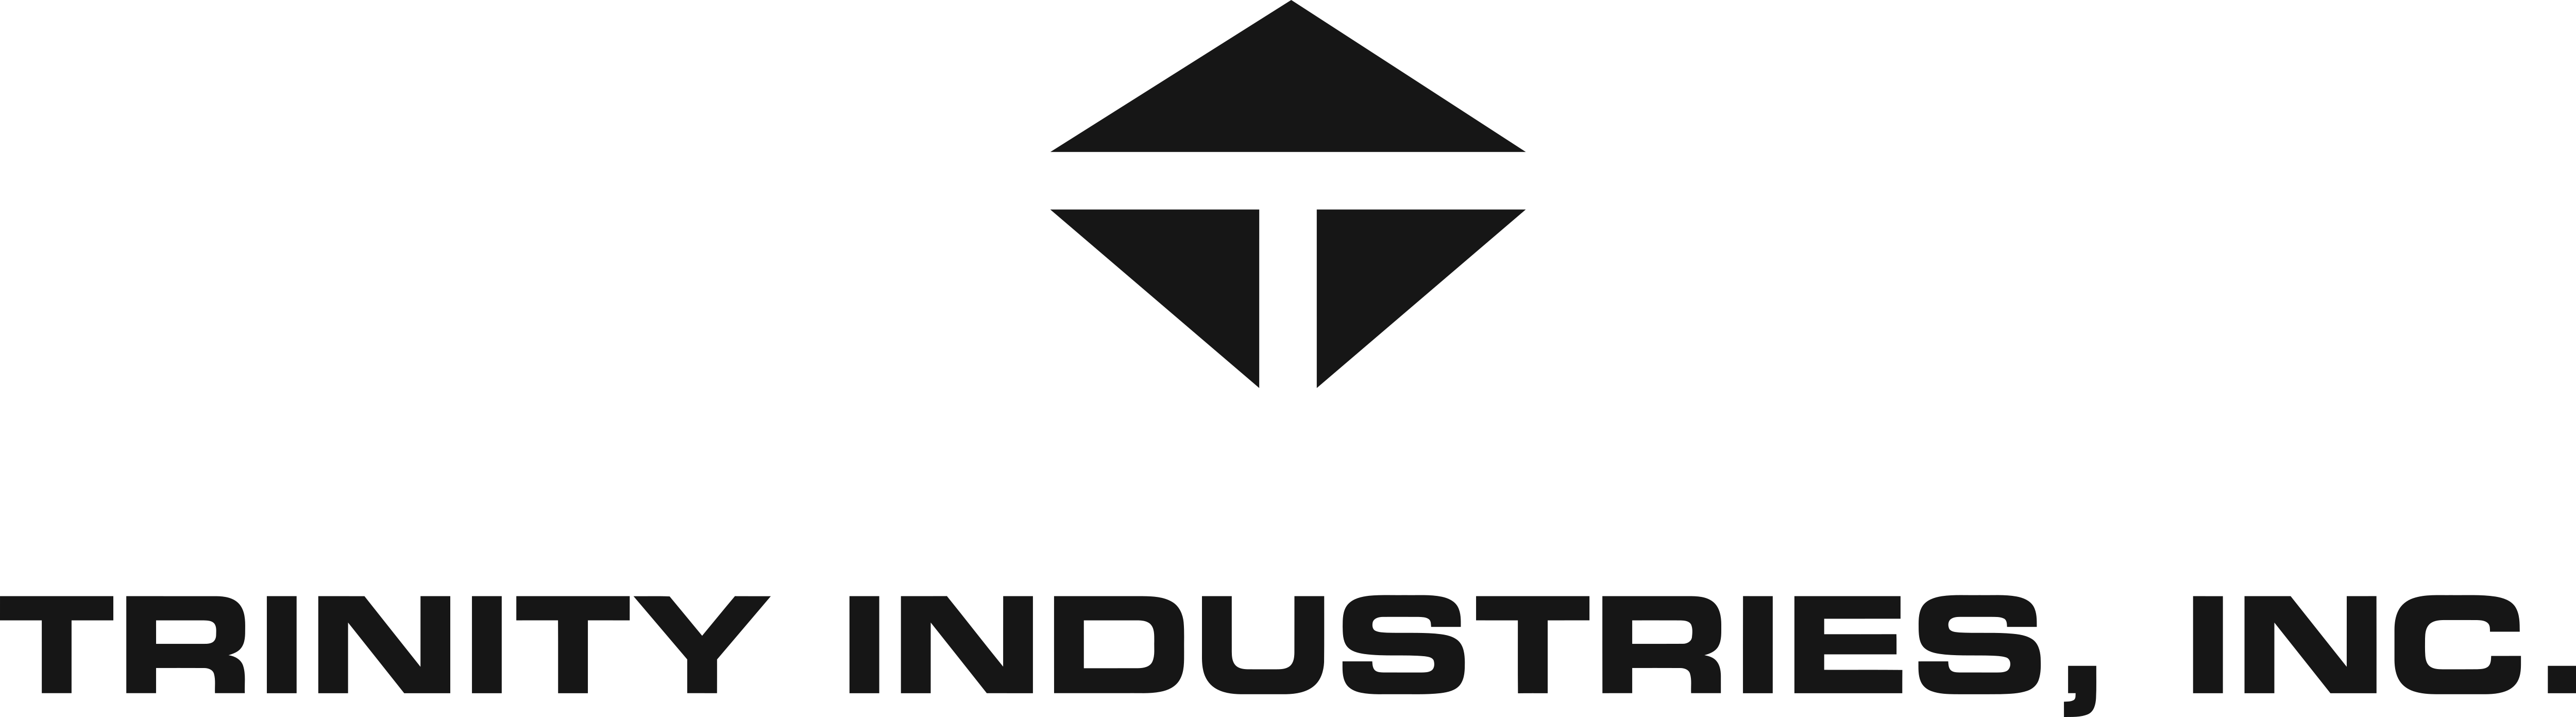 Trinity Industries (highway Products Business)